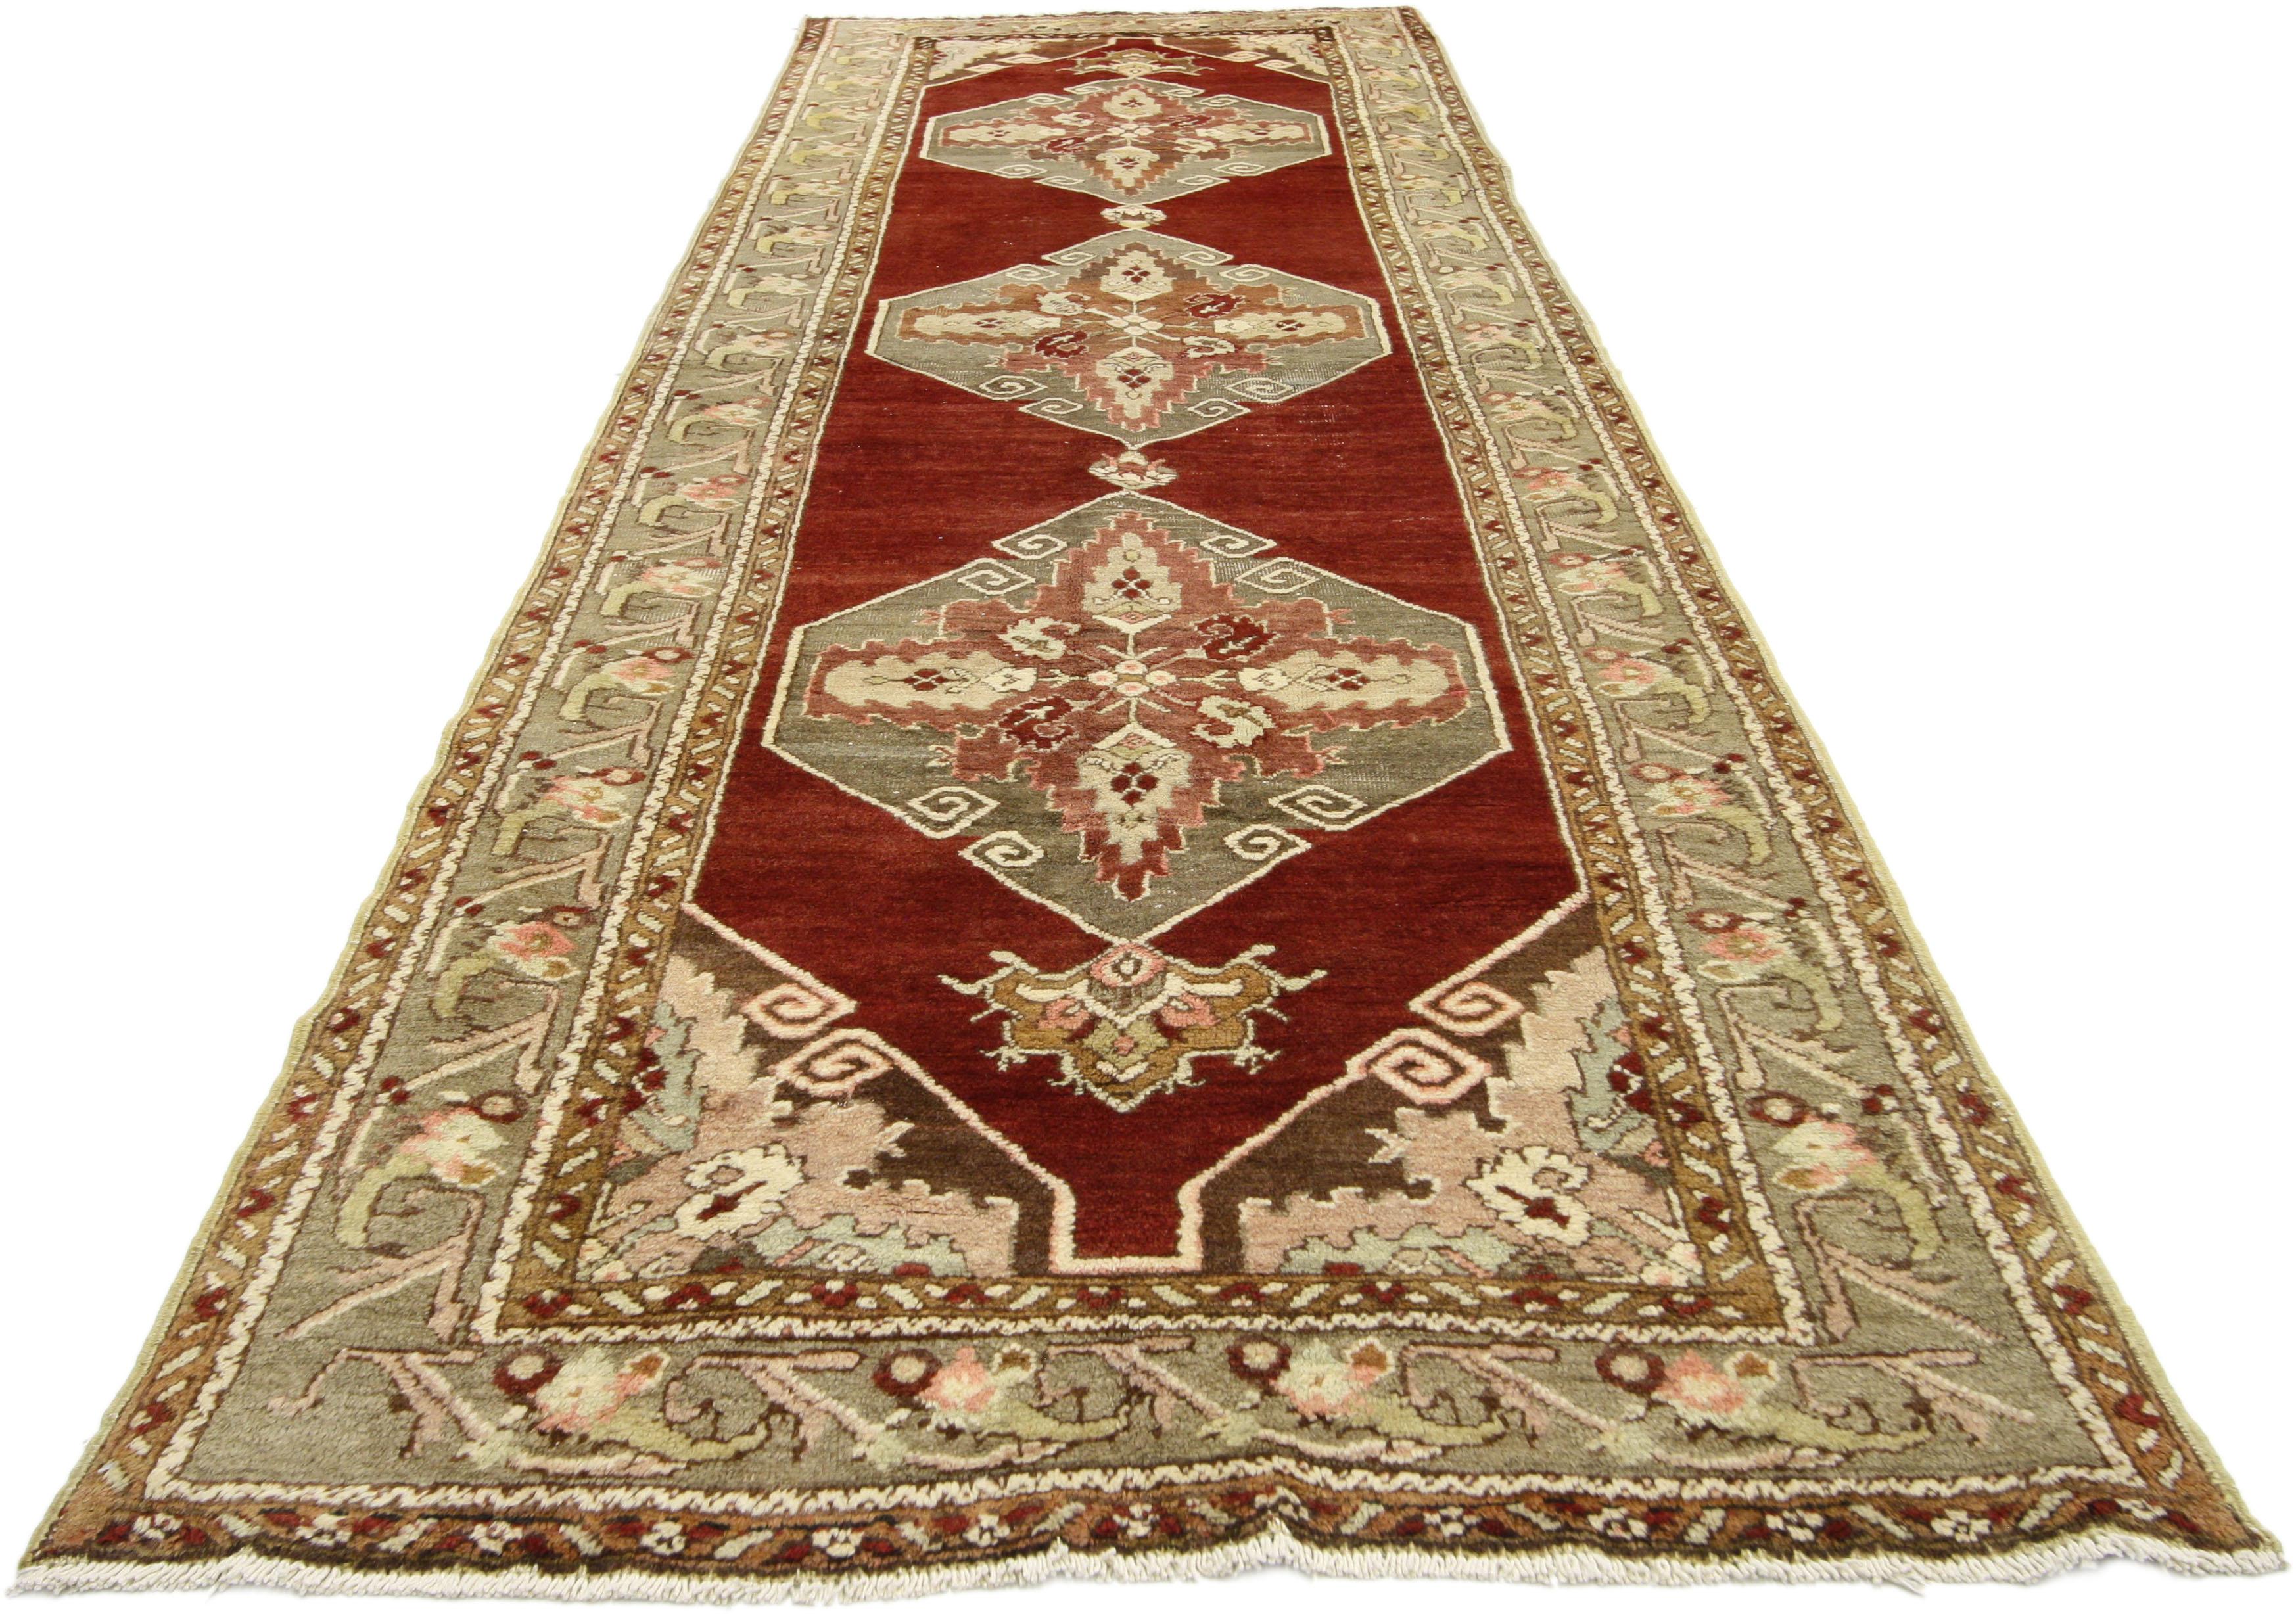 52402, vintage Turkish Oushak runner, Jacobean style hallway runner. This hand-knotted wool vintage Turkish Oushak runner features three connected hexagonal medallions capped with palmette pendants spread across an abrashed scarlet red field. Each